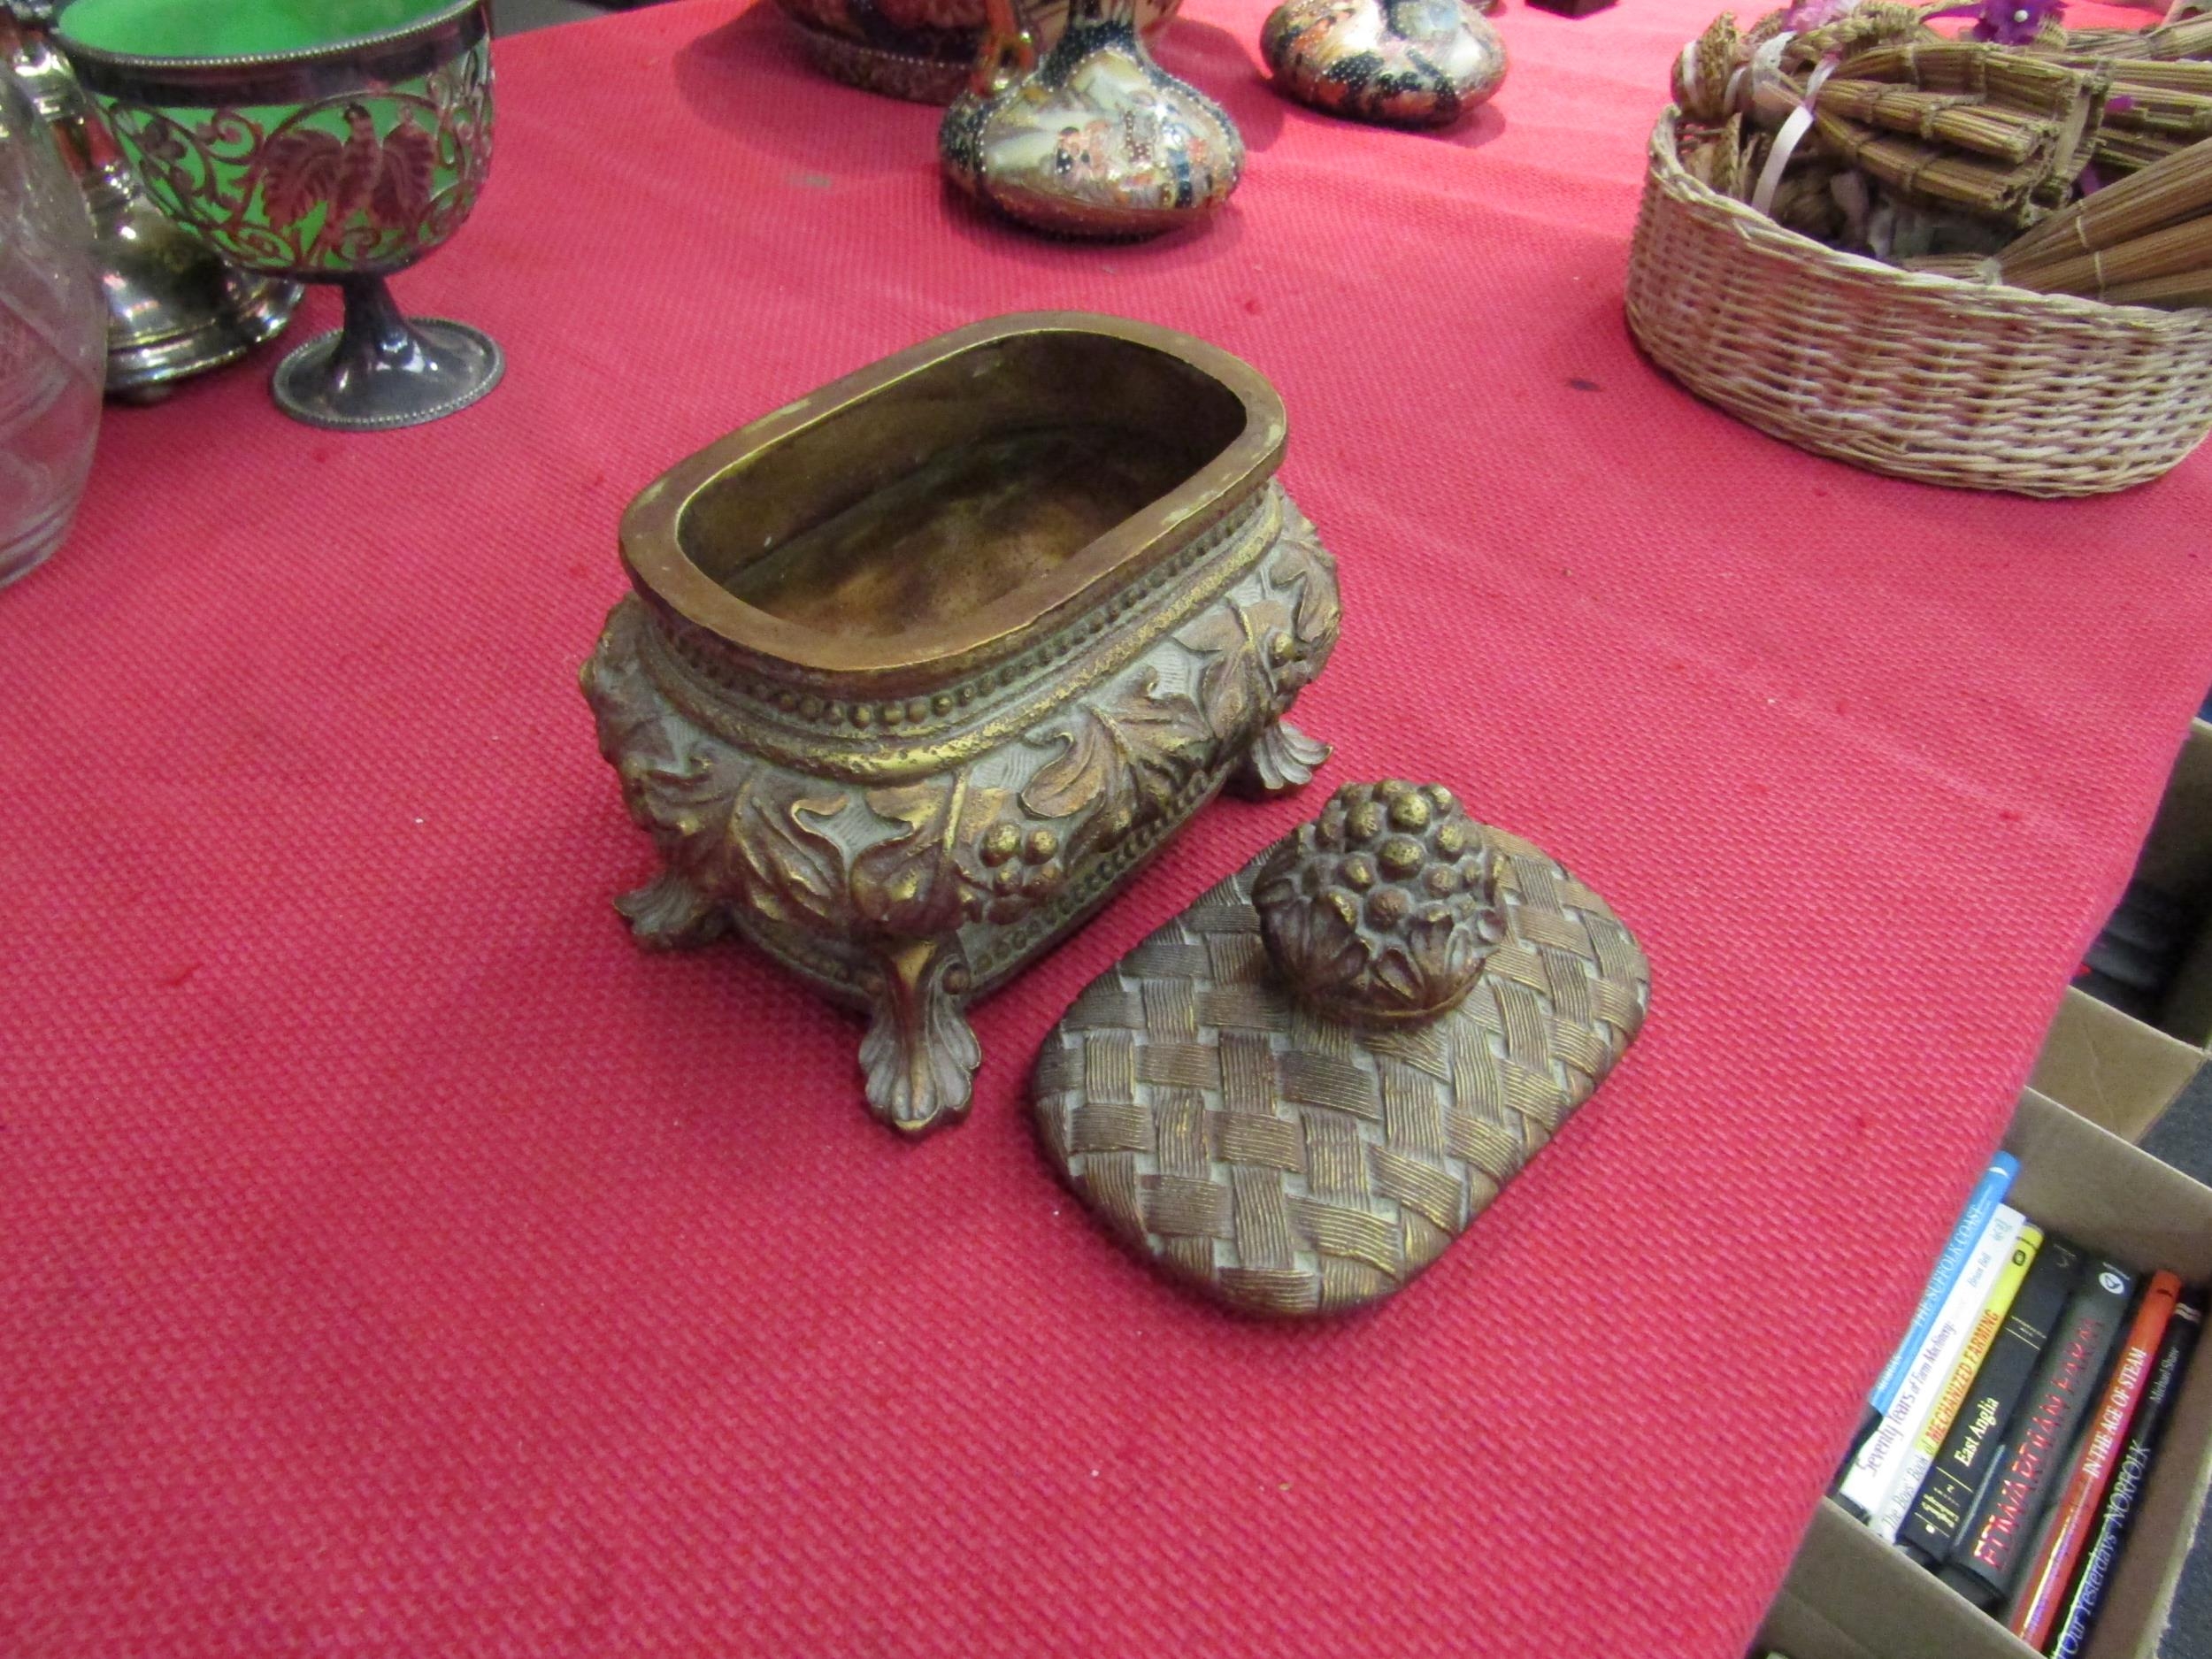 A decorative gilt trinket box with leaves and berry finial - Image 2 of 2